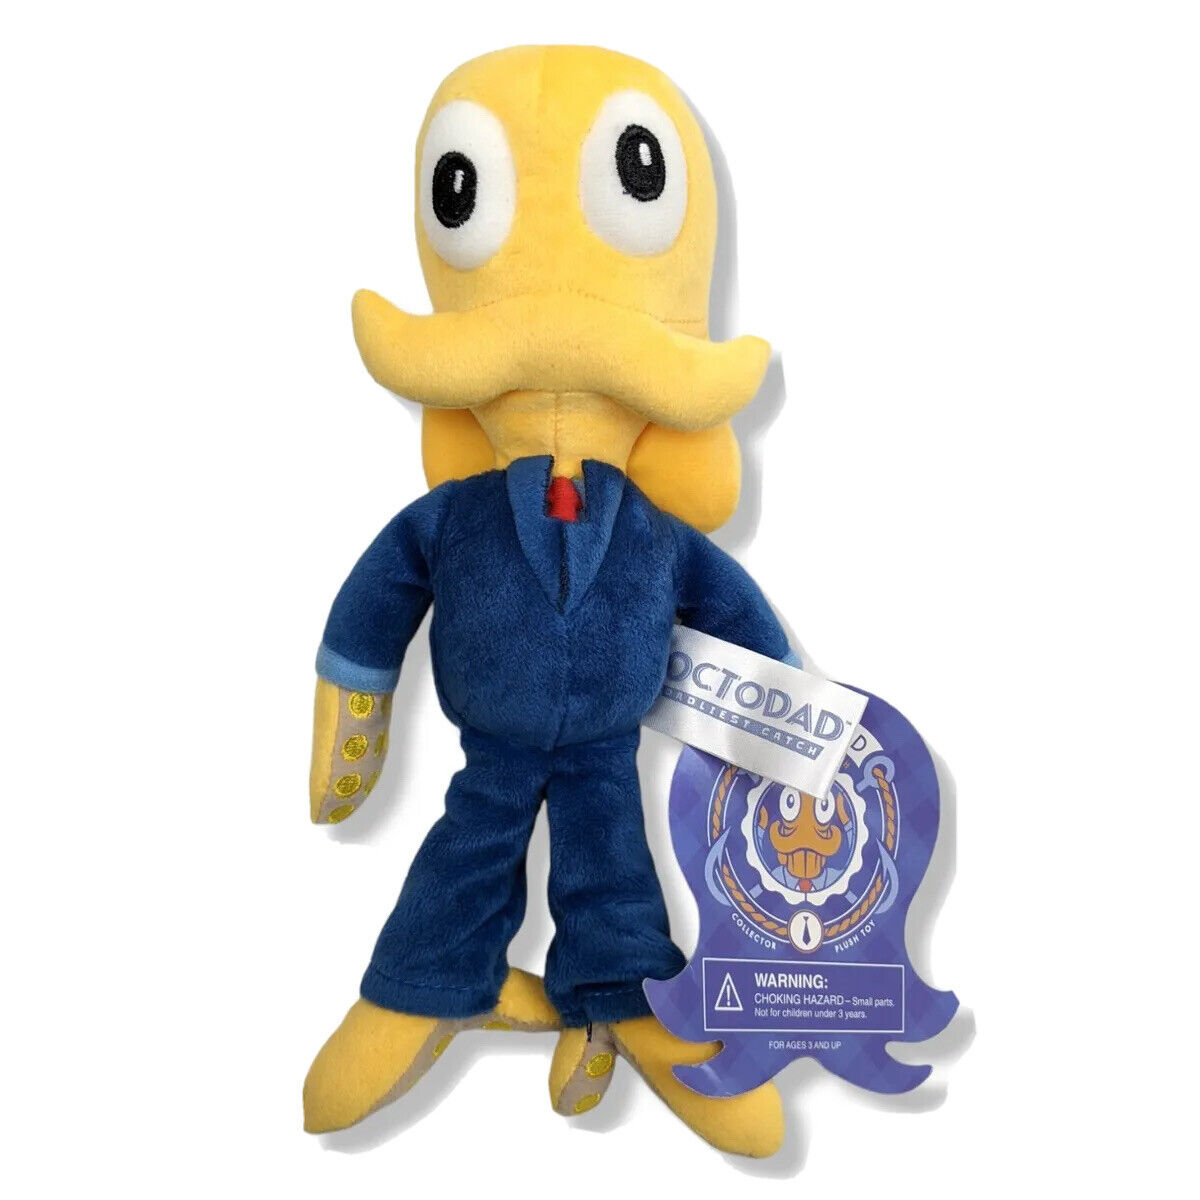 NEW PLUSH DOLL FIGURE OCTODAD OCTOPUS DADLIEST CATCH FAN GAMER YOUNG HORSES TOY